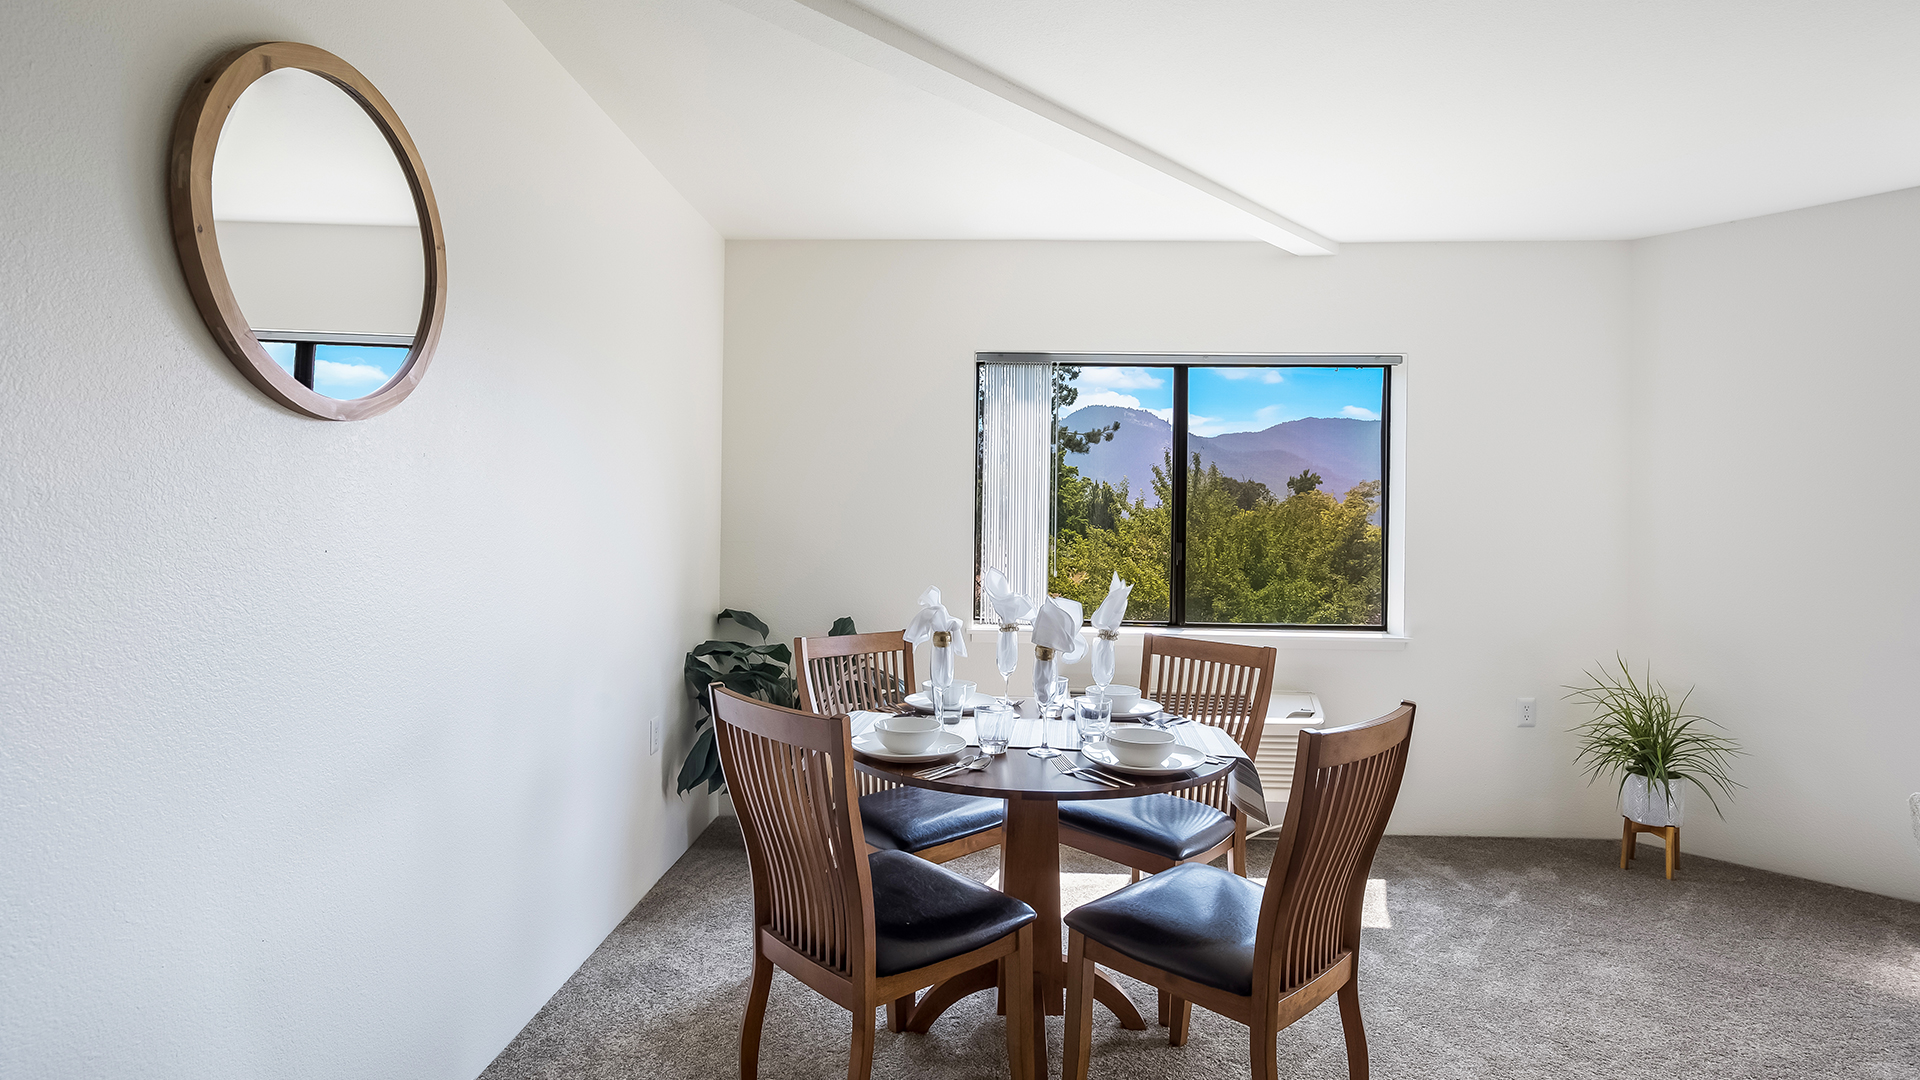 Dining area in front of a window looking at trees and mountains